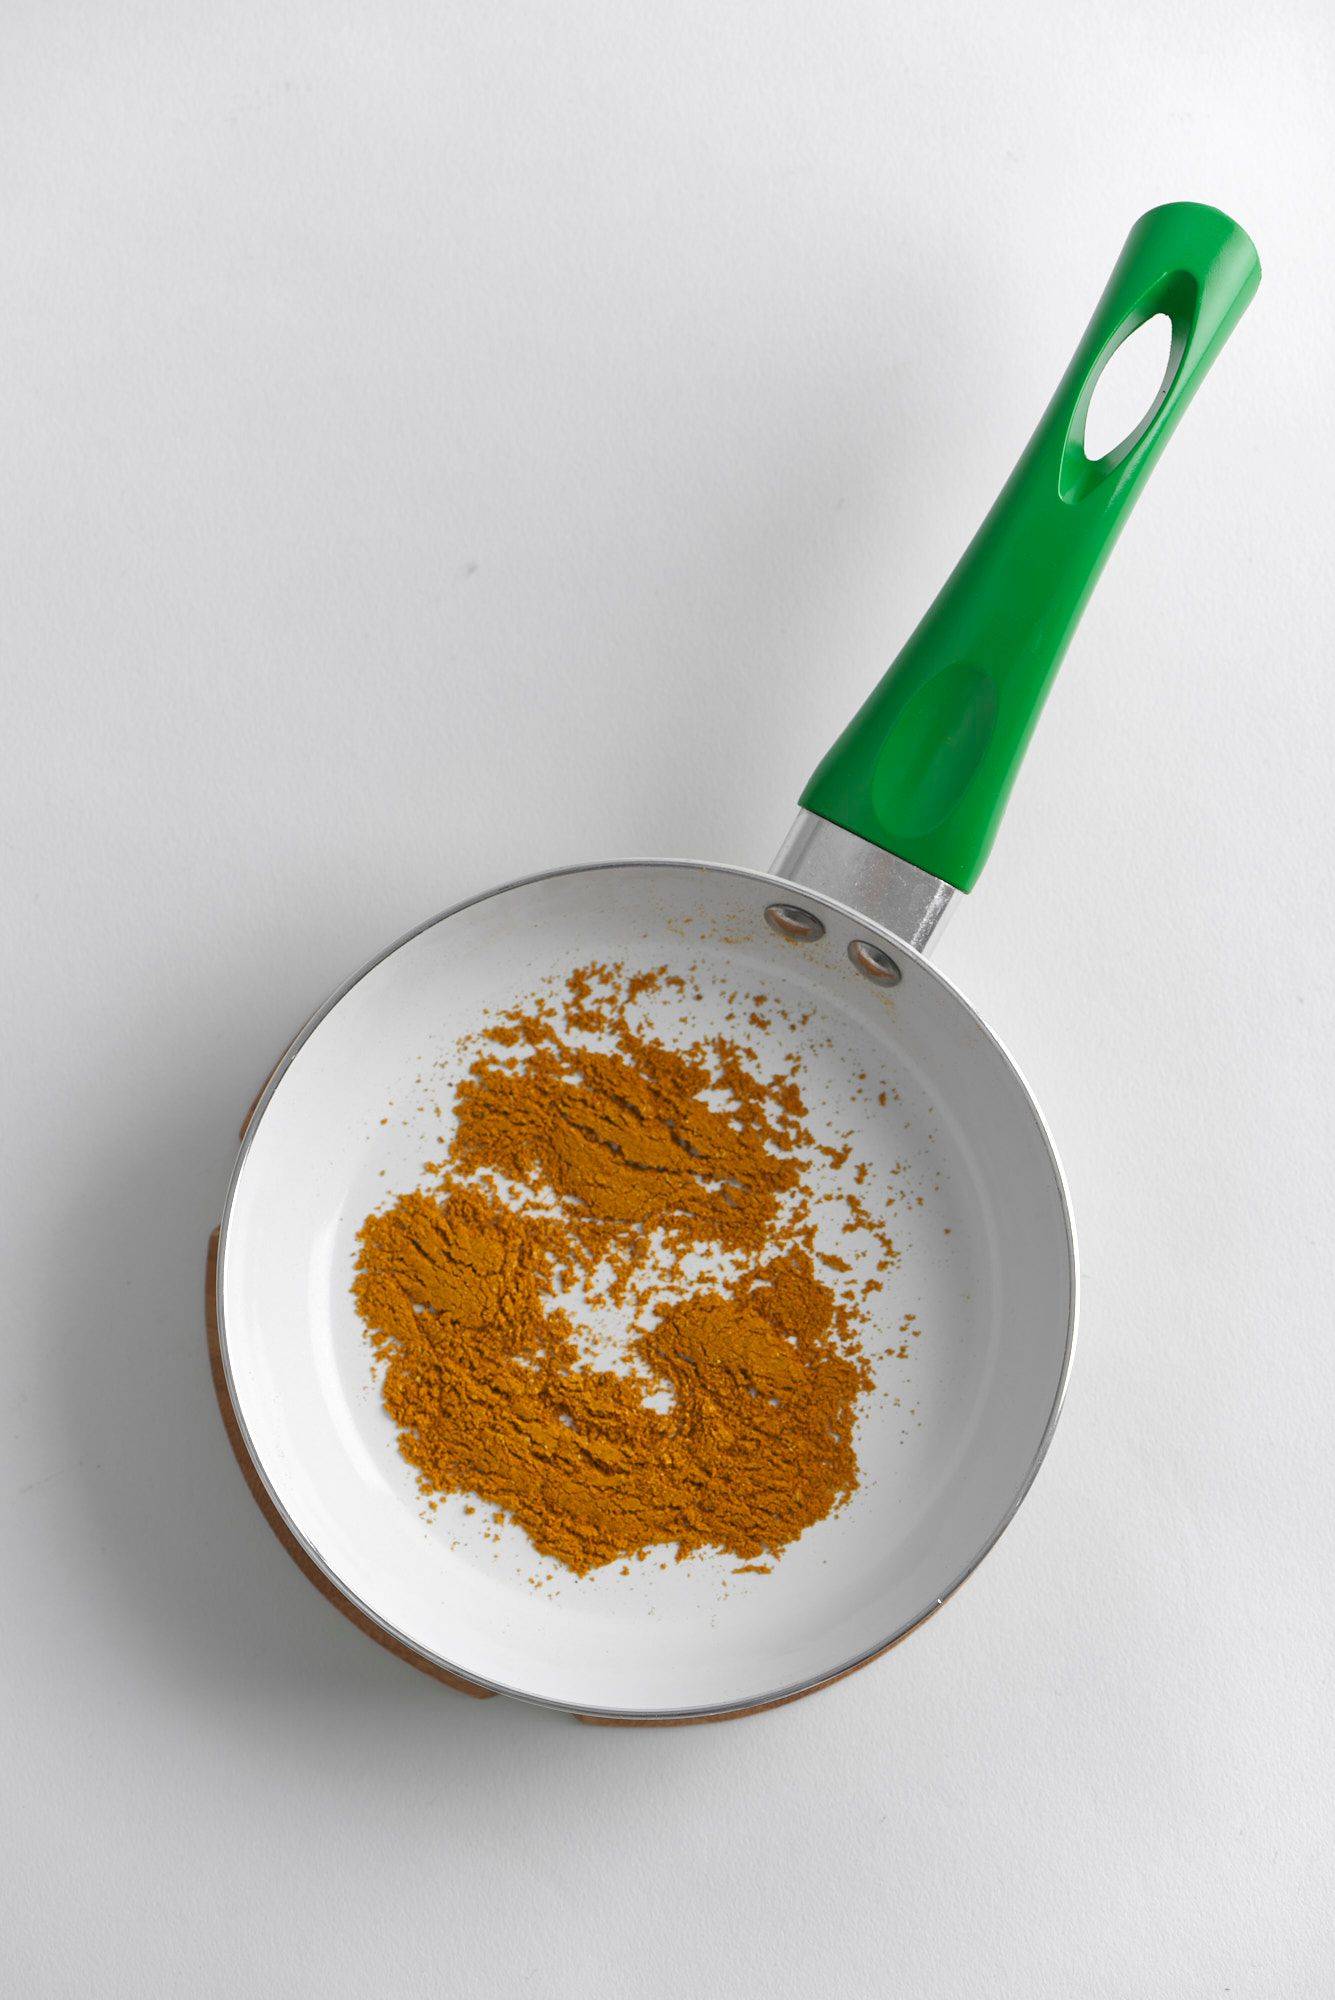 roasted madras curry powder in a green pan on a gray plate with white background